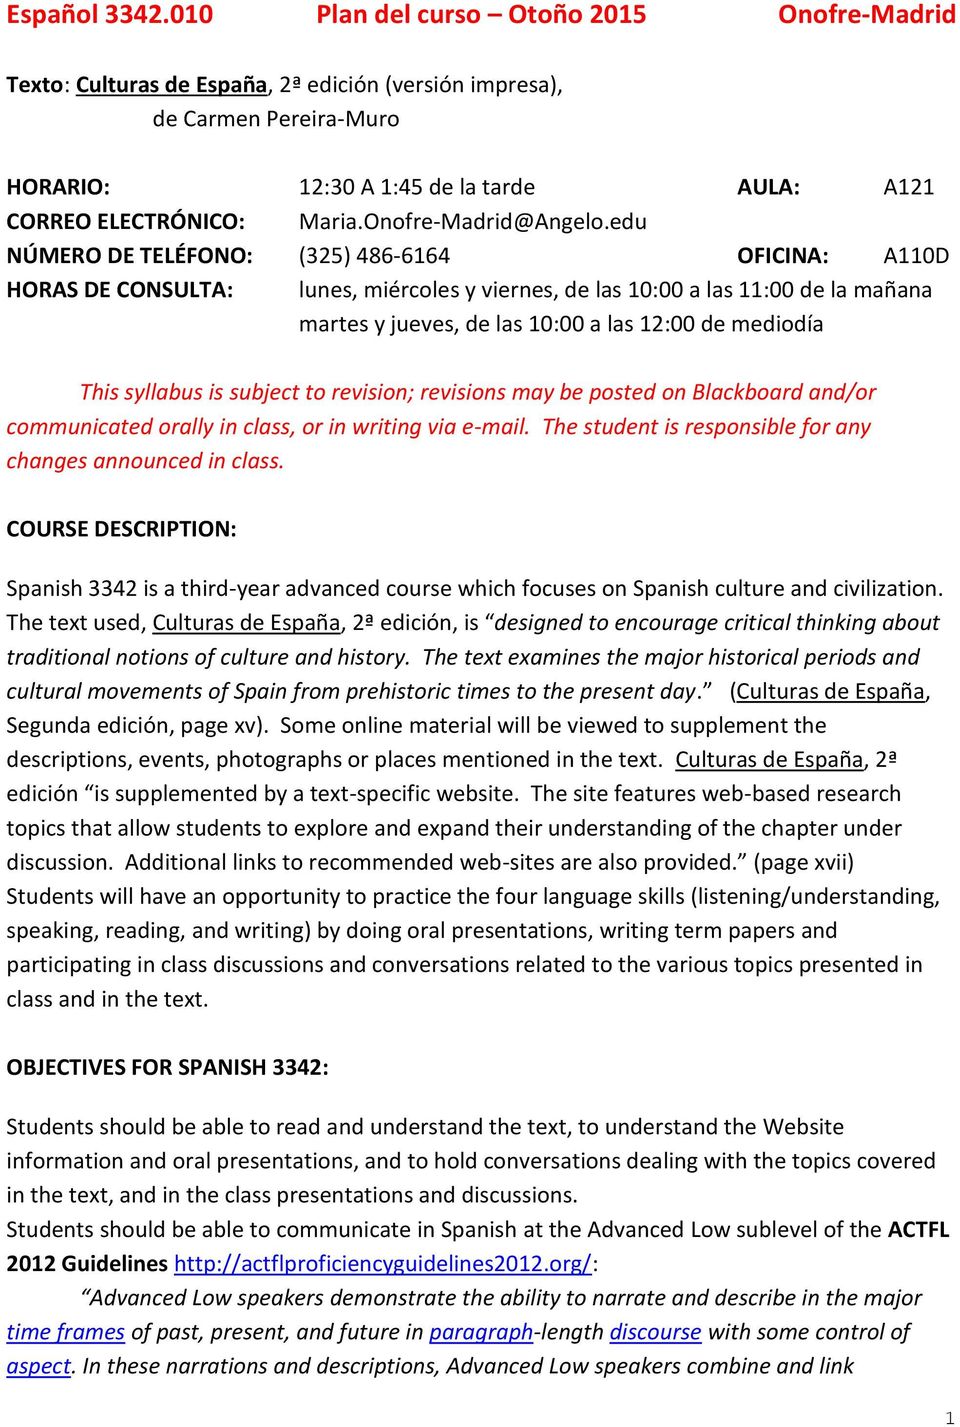 syllabus is subject to revision; revisions may be posted on Blackboard and/or communicated orally in class, or in writing via e-mail. The student is responsible for any changes announced in class.